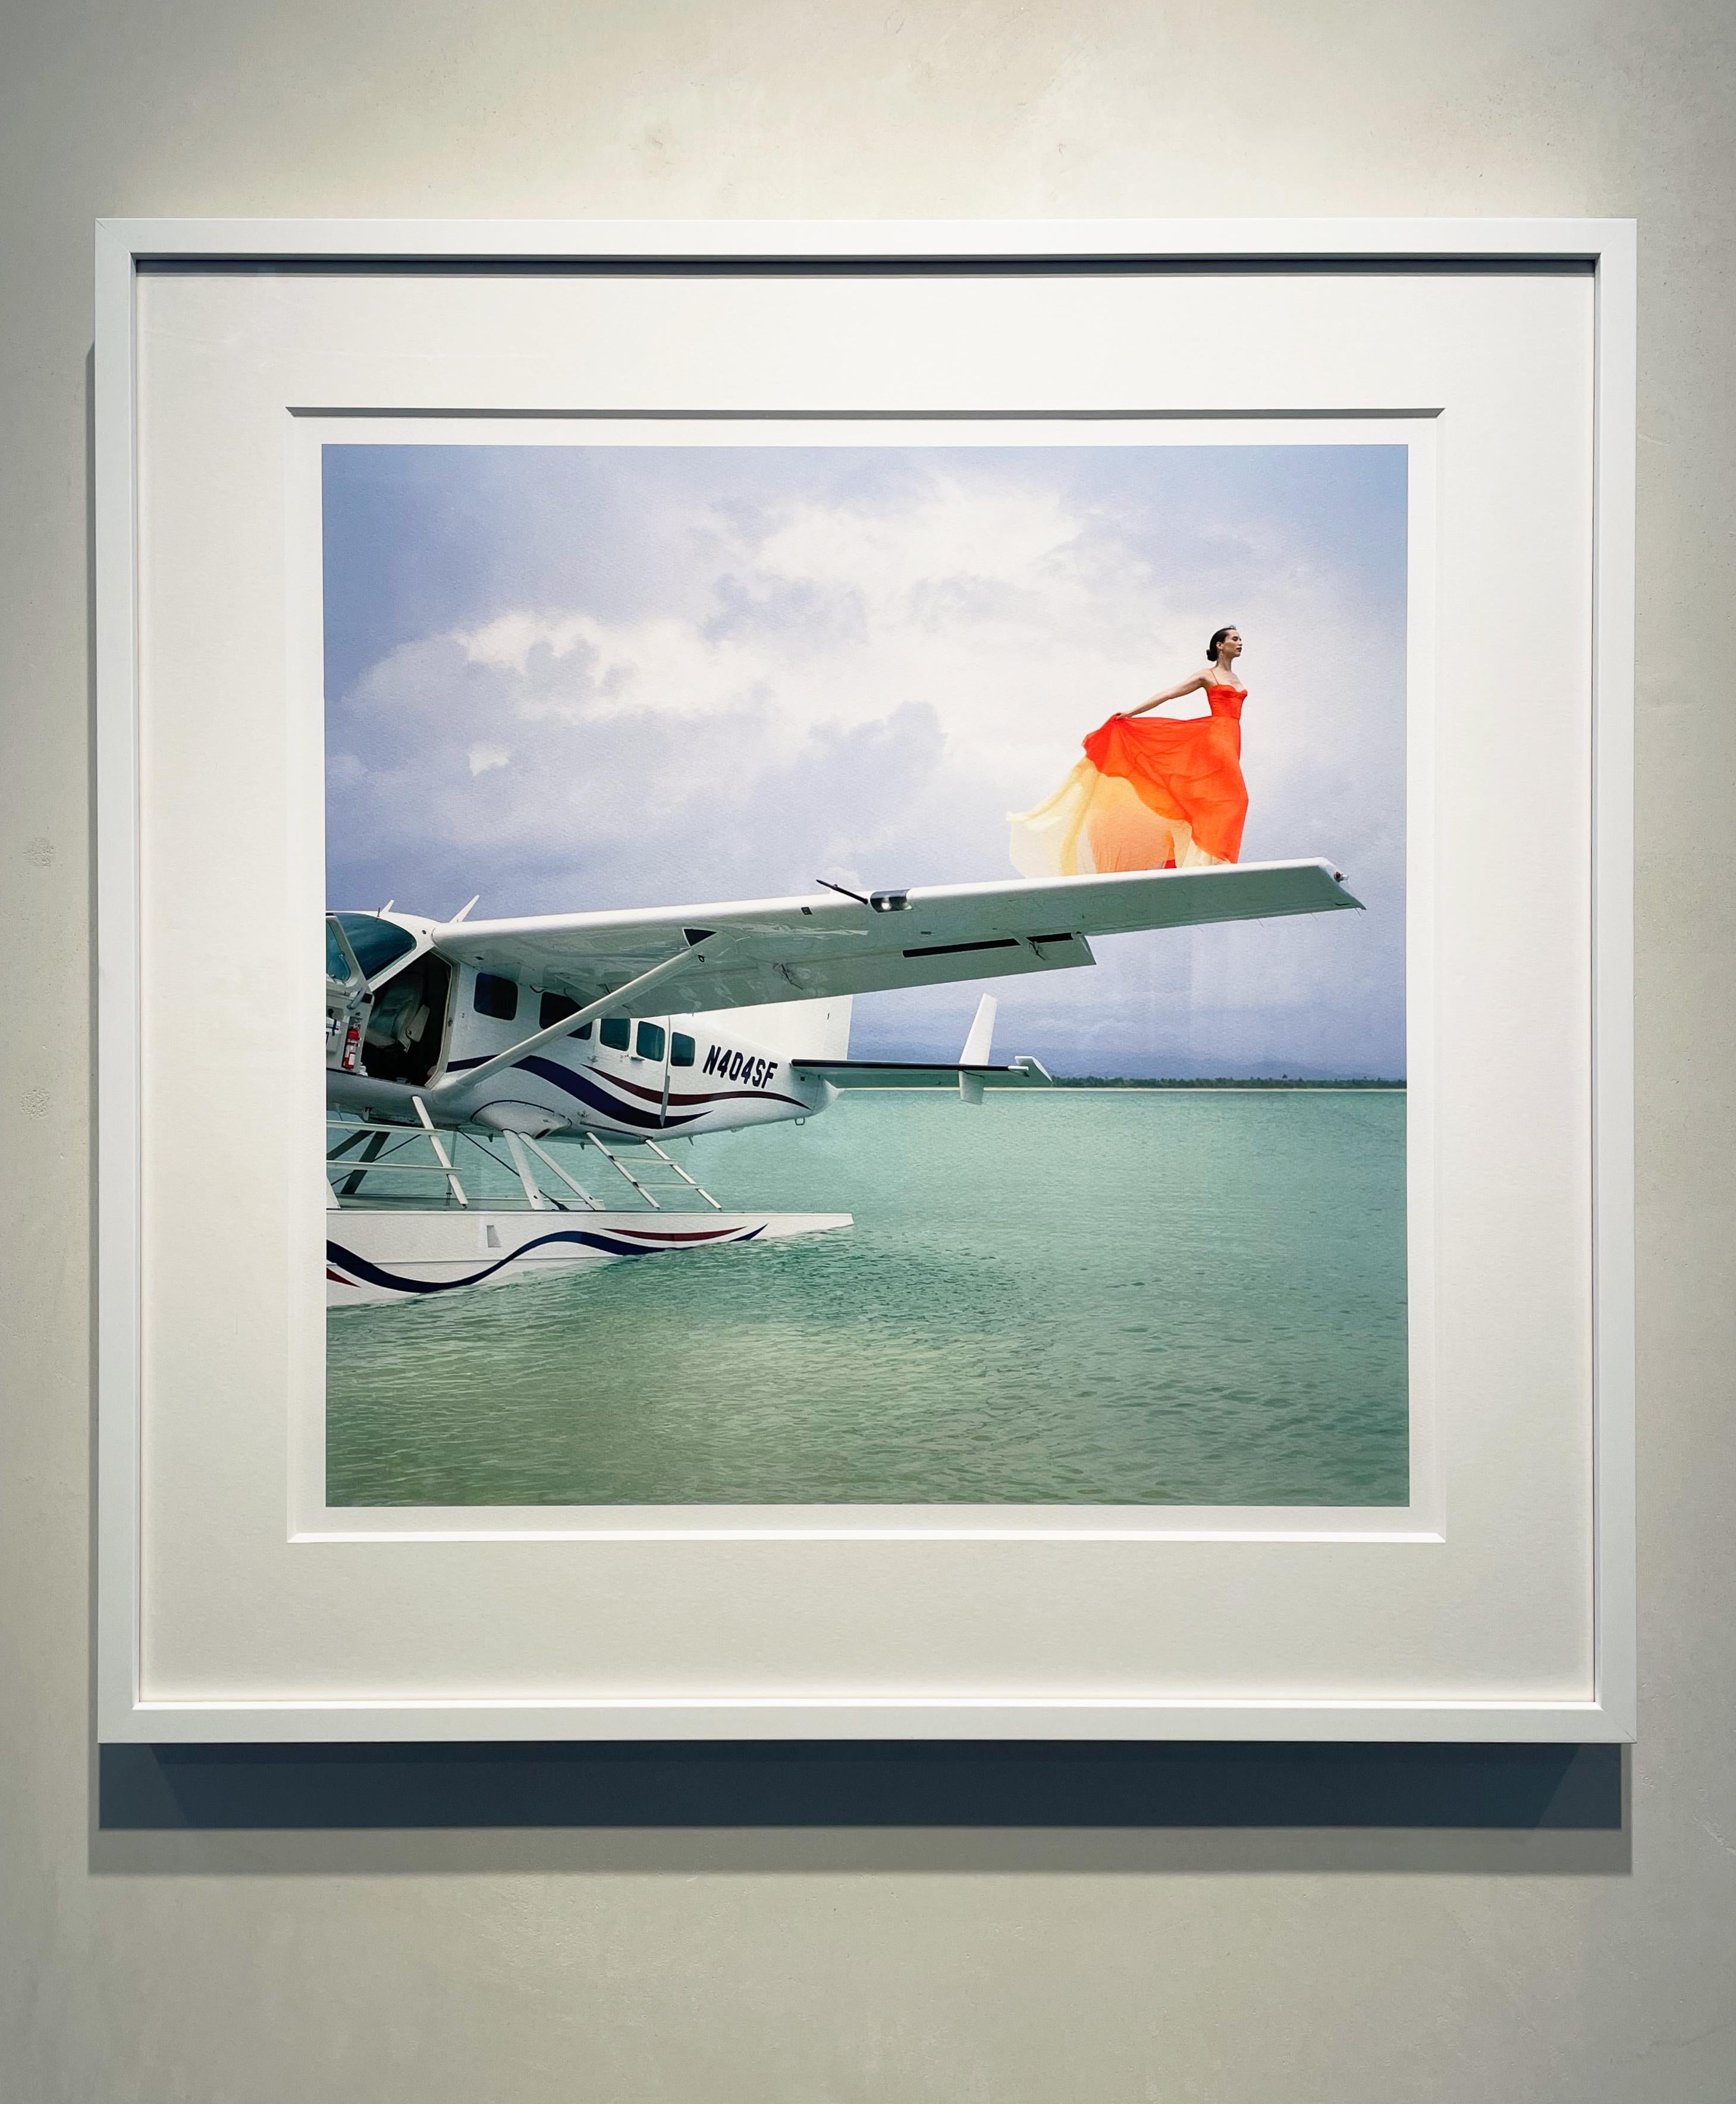 Saori on Sea Plane Wing No. 2, Dominican Republic - 28 x 28 inches framed - Contemporary Photograph by Rodney Smith